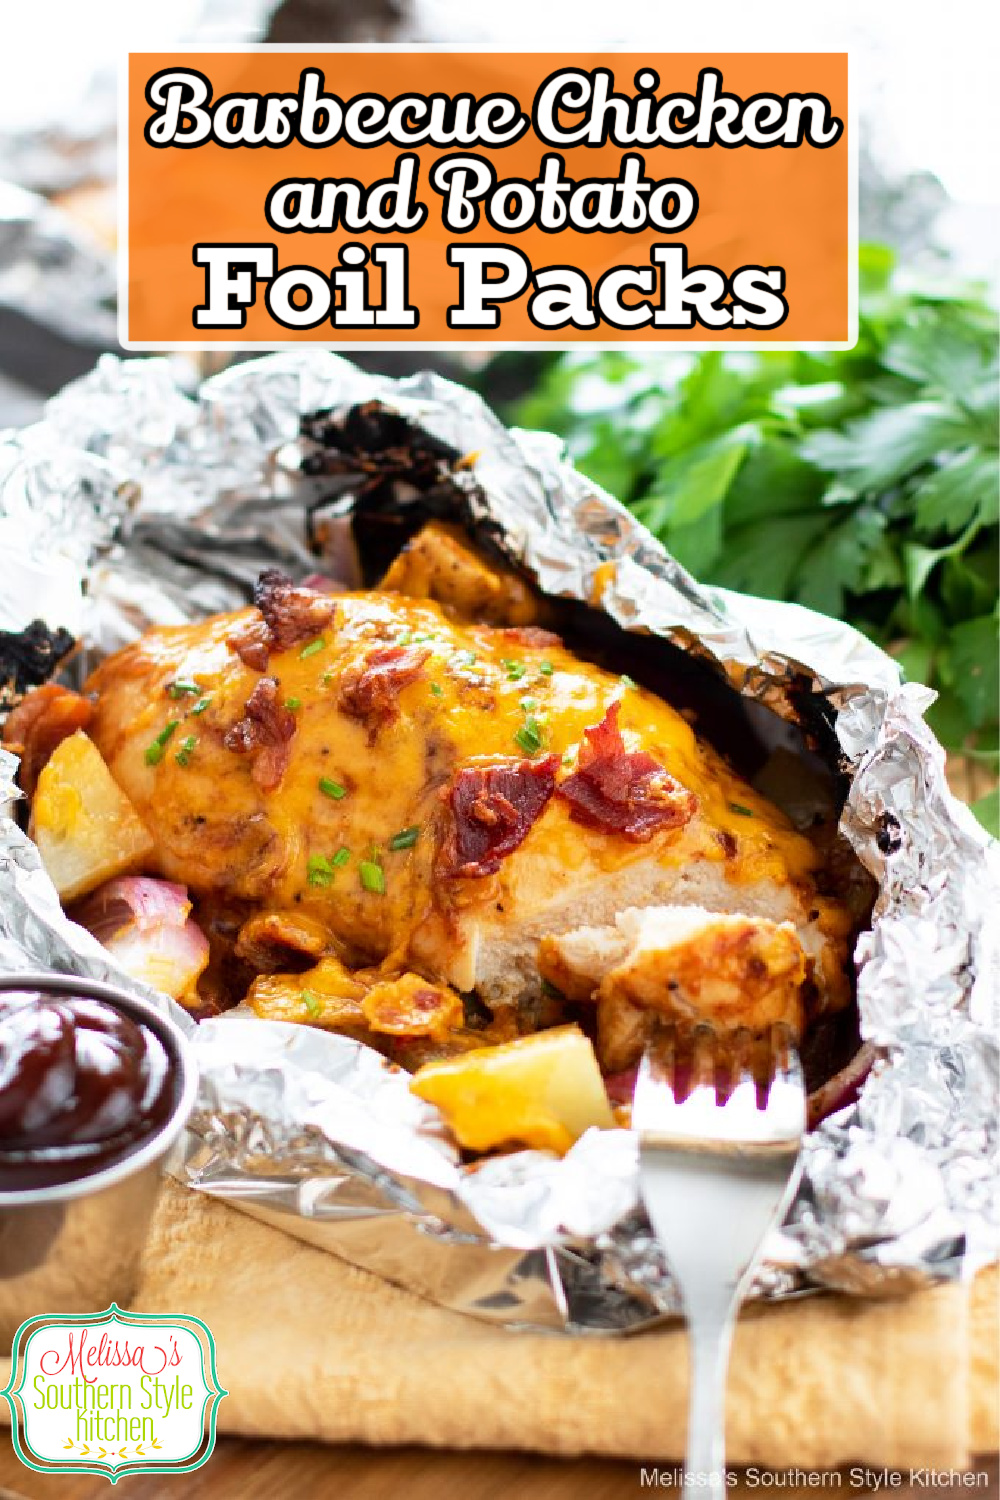 These oh so easy Barbecue Chicken and Potato Foil Packs can be made in the oven, on a grill or over a campfire #foilpacks #chickenfoilpacks #easychickenbreastrecipes #barbecuechicken #bbqchickenfoilpacks